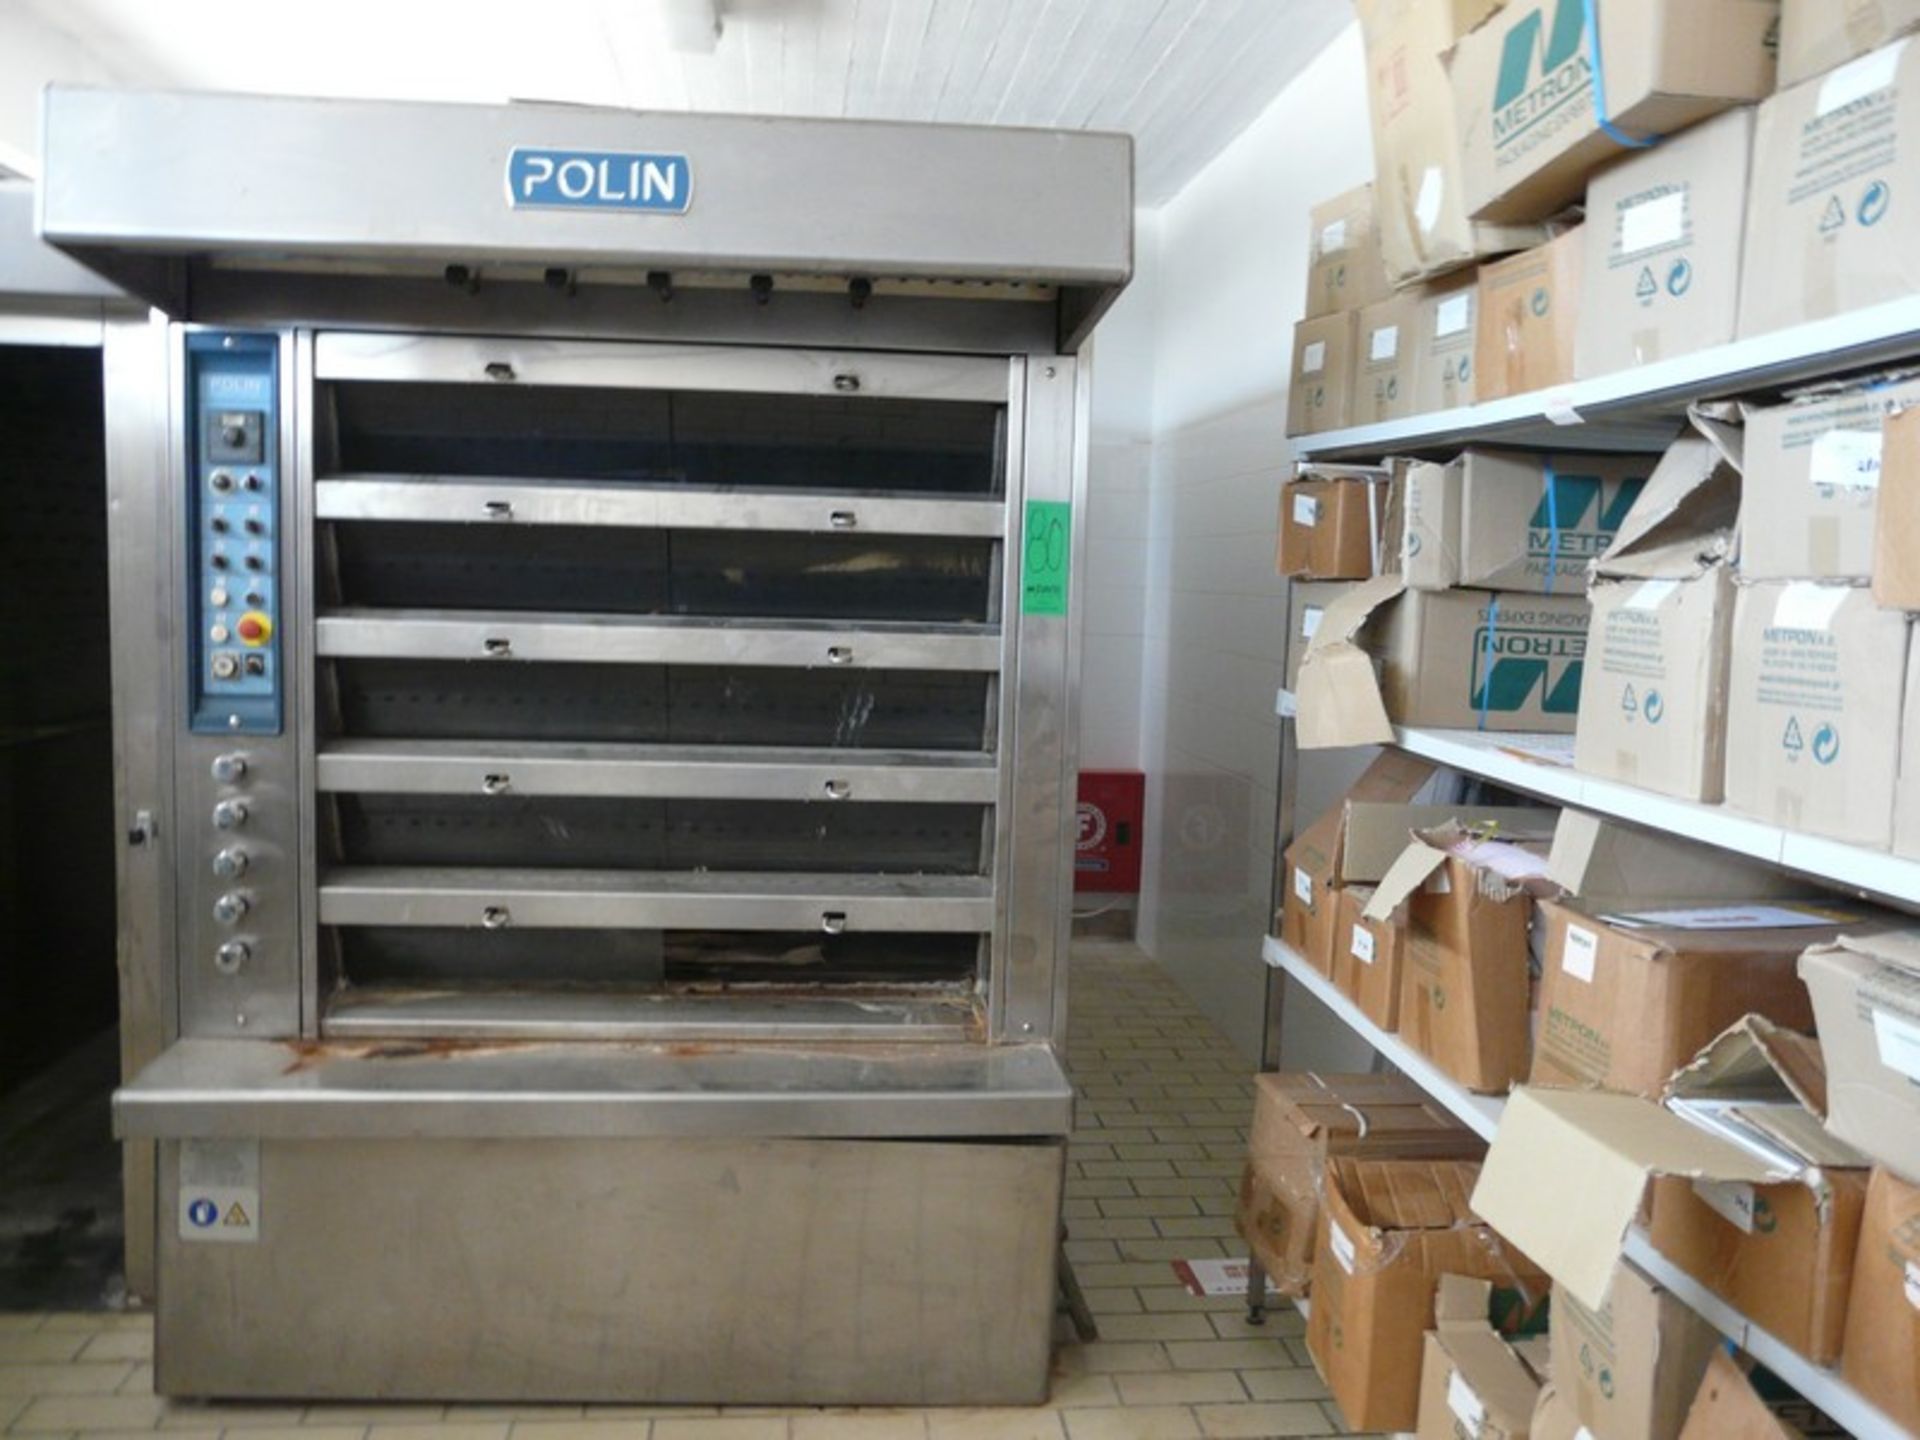 English: POLIN Oven With 10 Stations, Humidity, Gas Burner, Y.O.M.: 2003, Construction Stainless